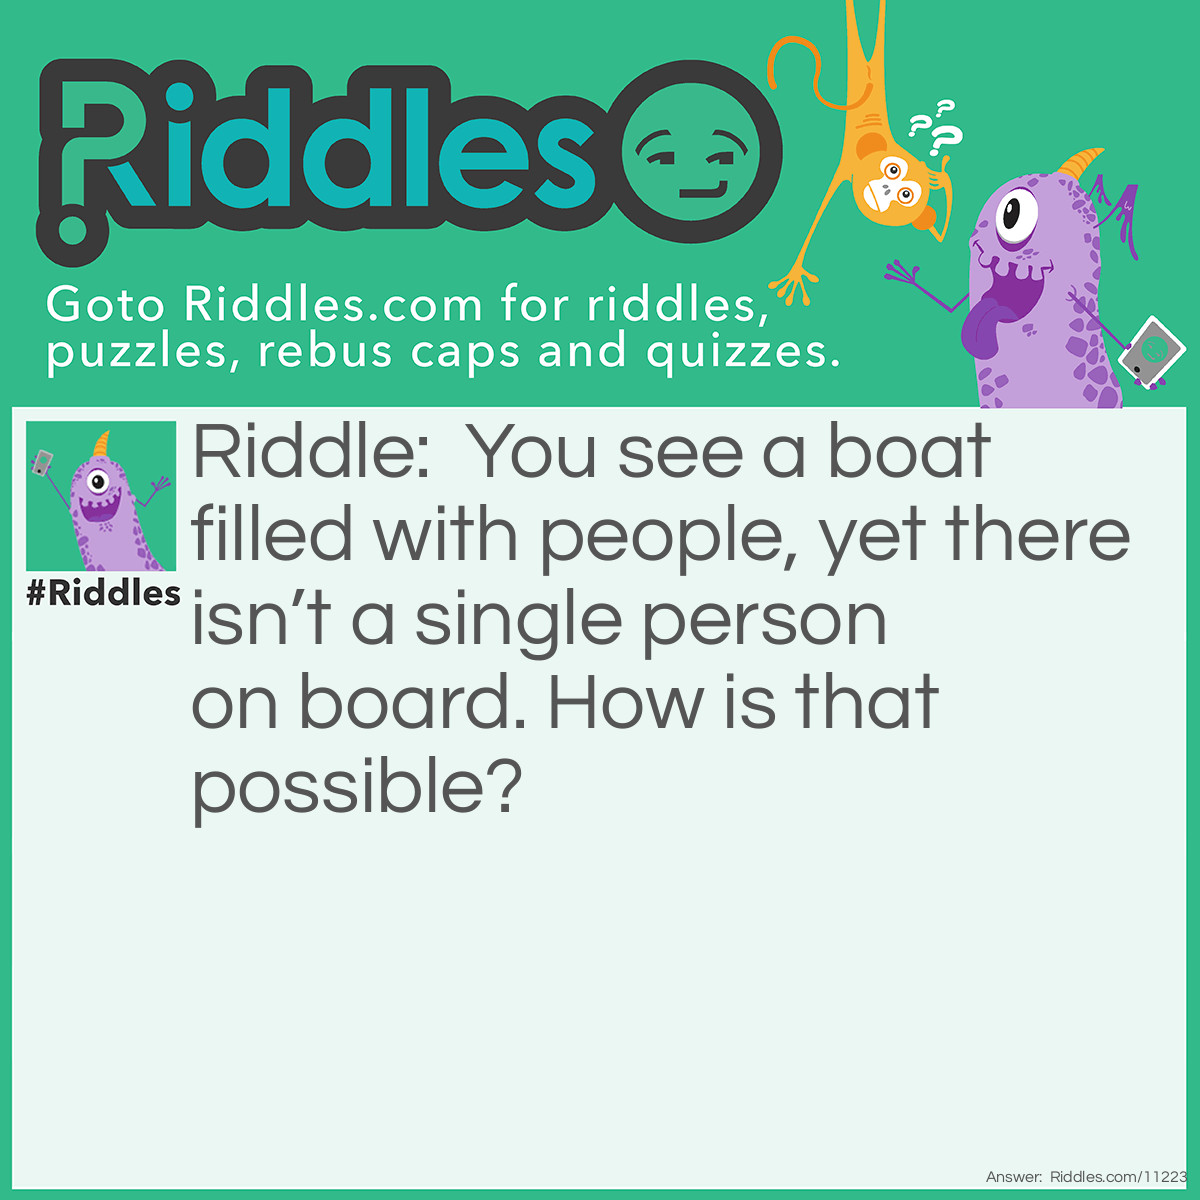 Riddle: You see a boat filled with people, yet there isn’t a single person on board. How is that possible? Answer: All the people on the boat are married